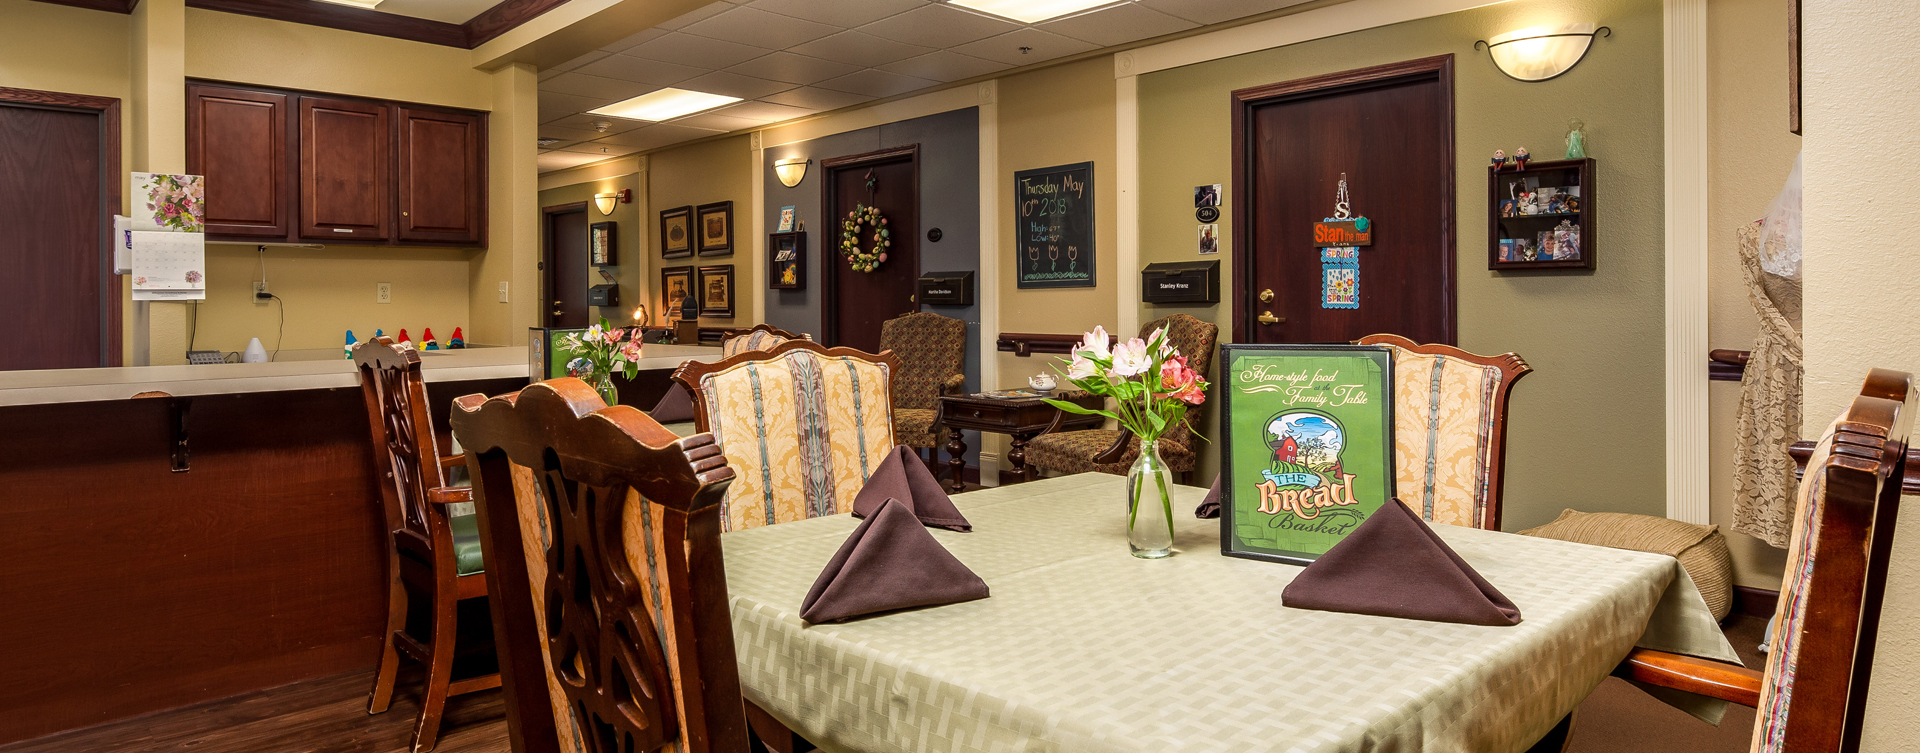 Mary B’s country kitchen helps establish routines, creates activities and triggers a sense of meal time at Bickford of Okemos